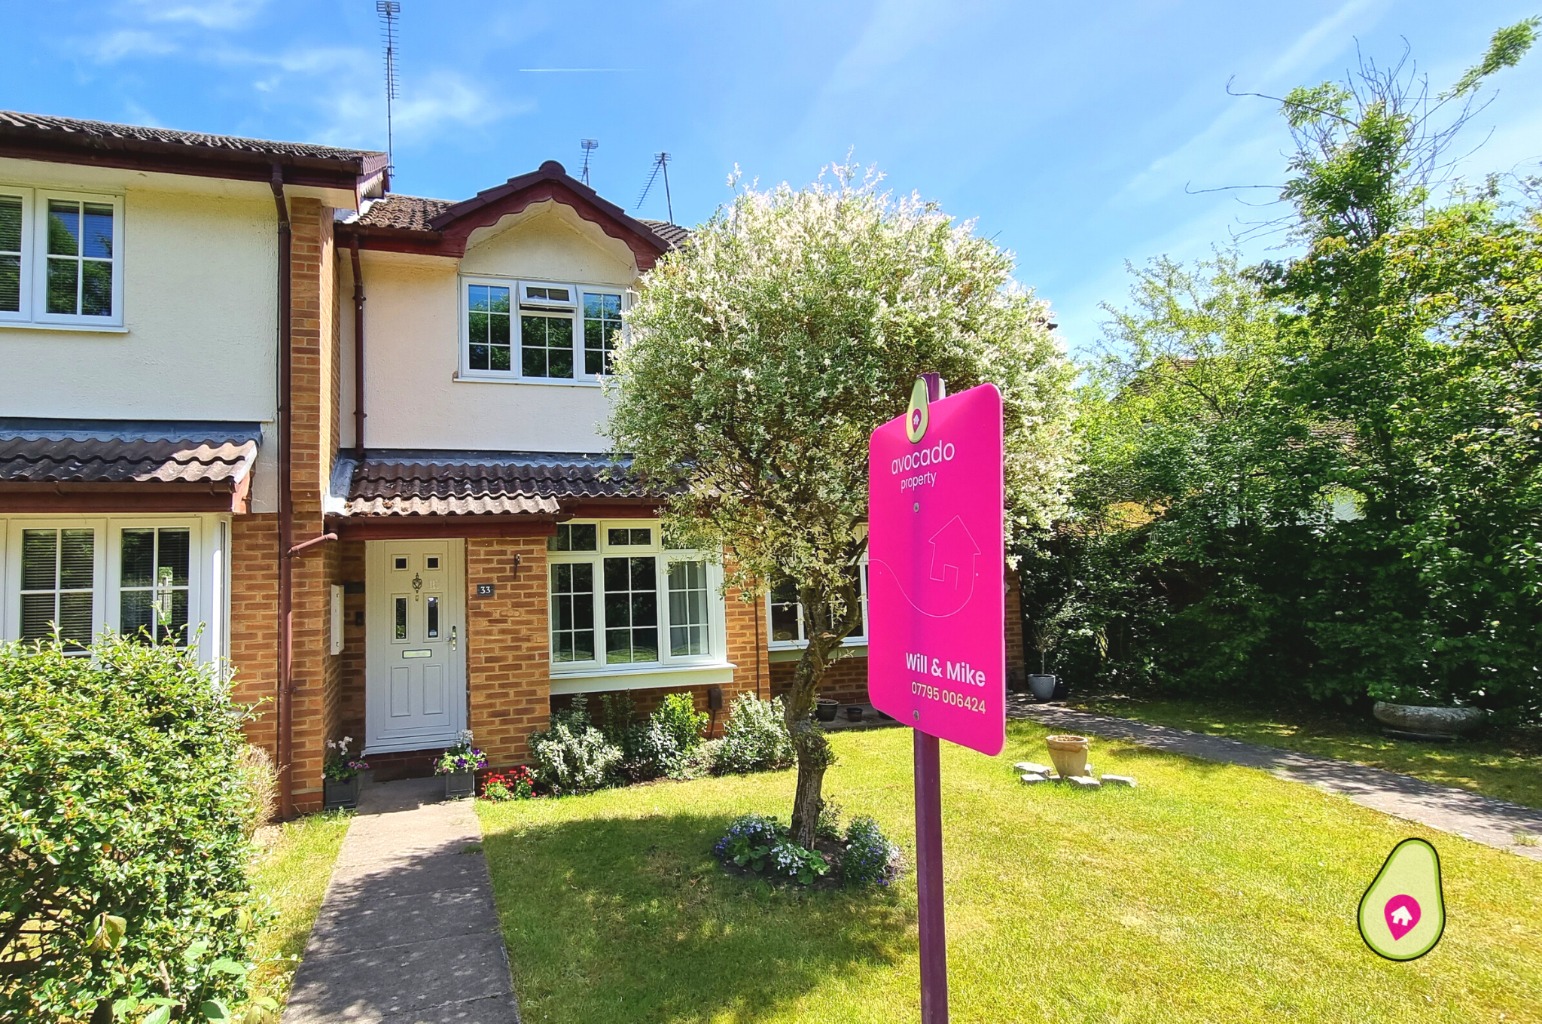 This two bedroom home offers a great opportunity for someone to buy their first home or pick up a great investment. The property is beautifully presented throughout and has a lovely private, sunny garden to the rear.